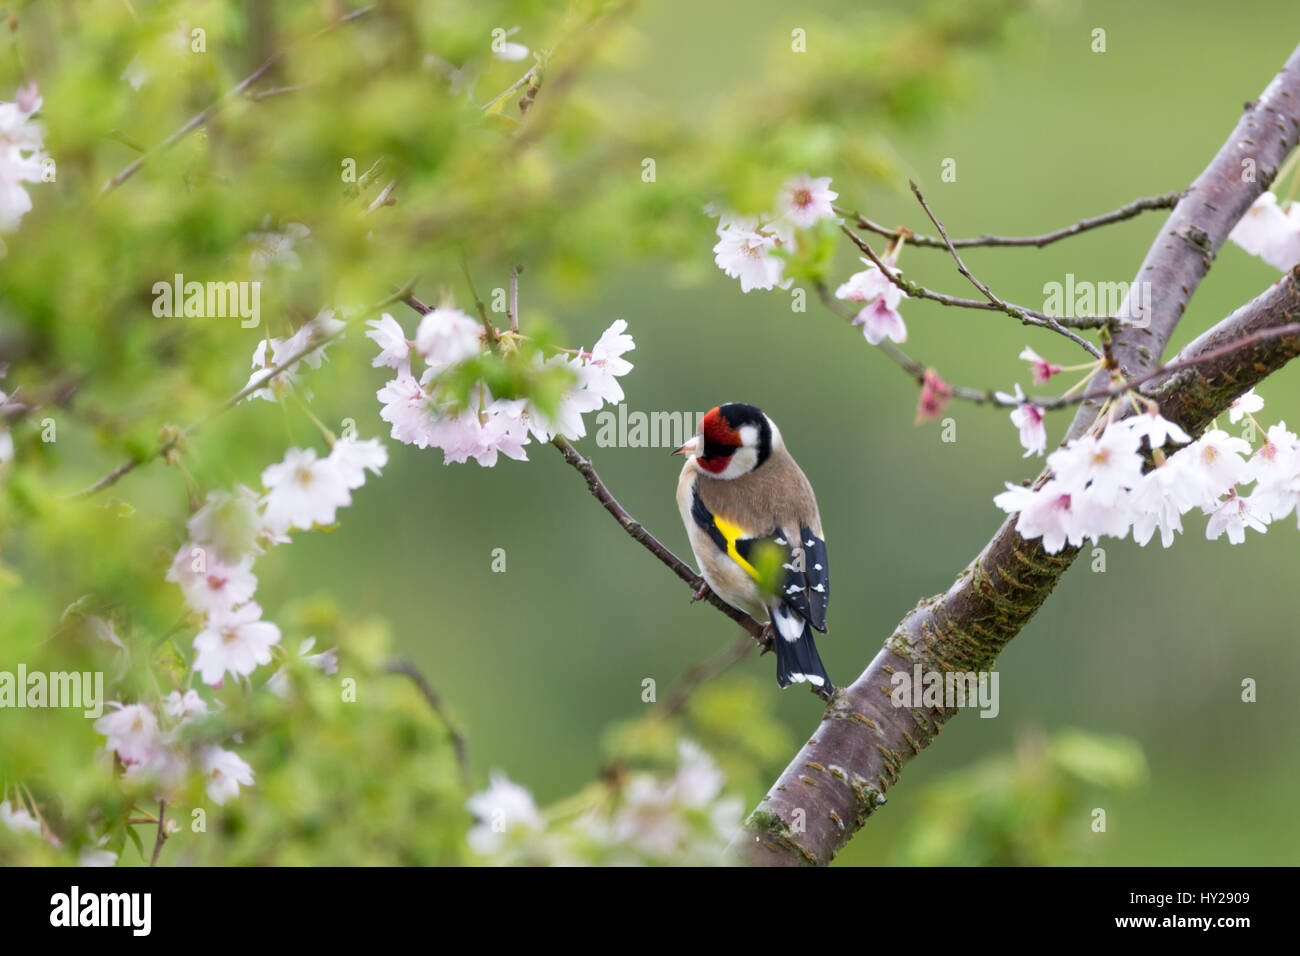 a Goldfinch (Carduelis carduelis) perches on a cherry blossom tree. Credit: Ian Jones/alamy Live News Stock Photo